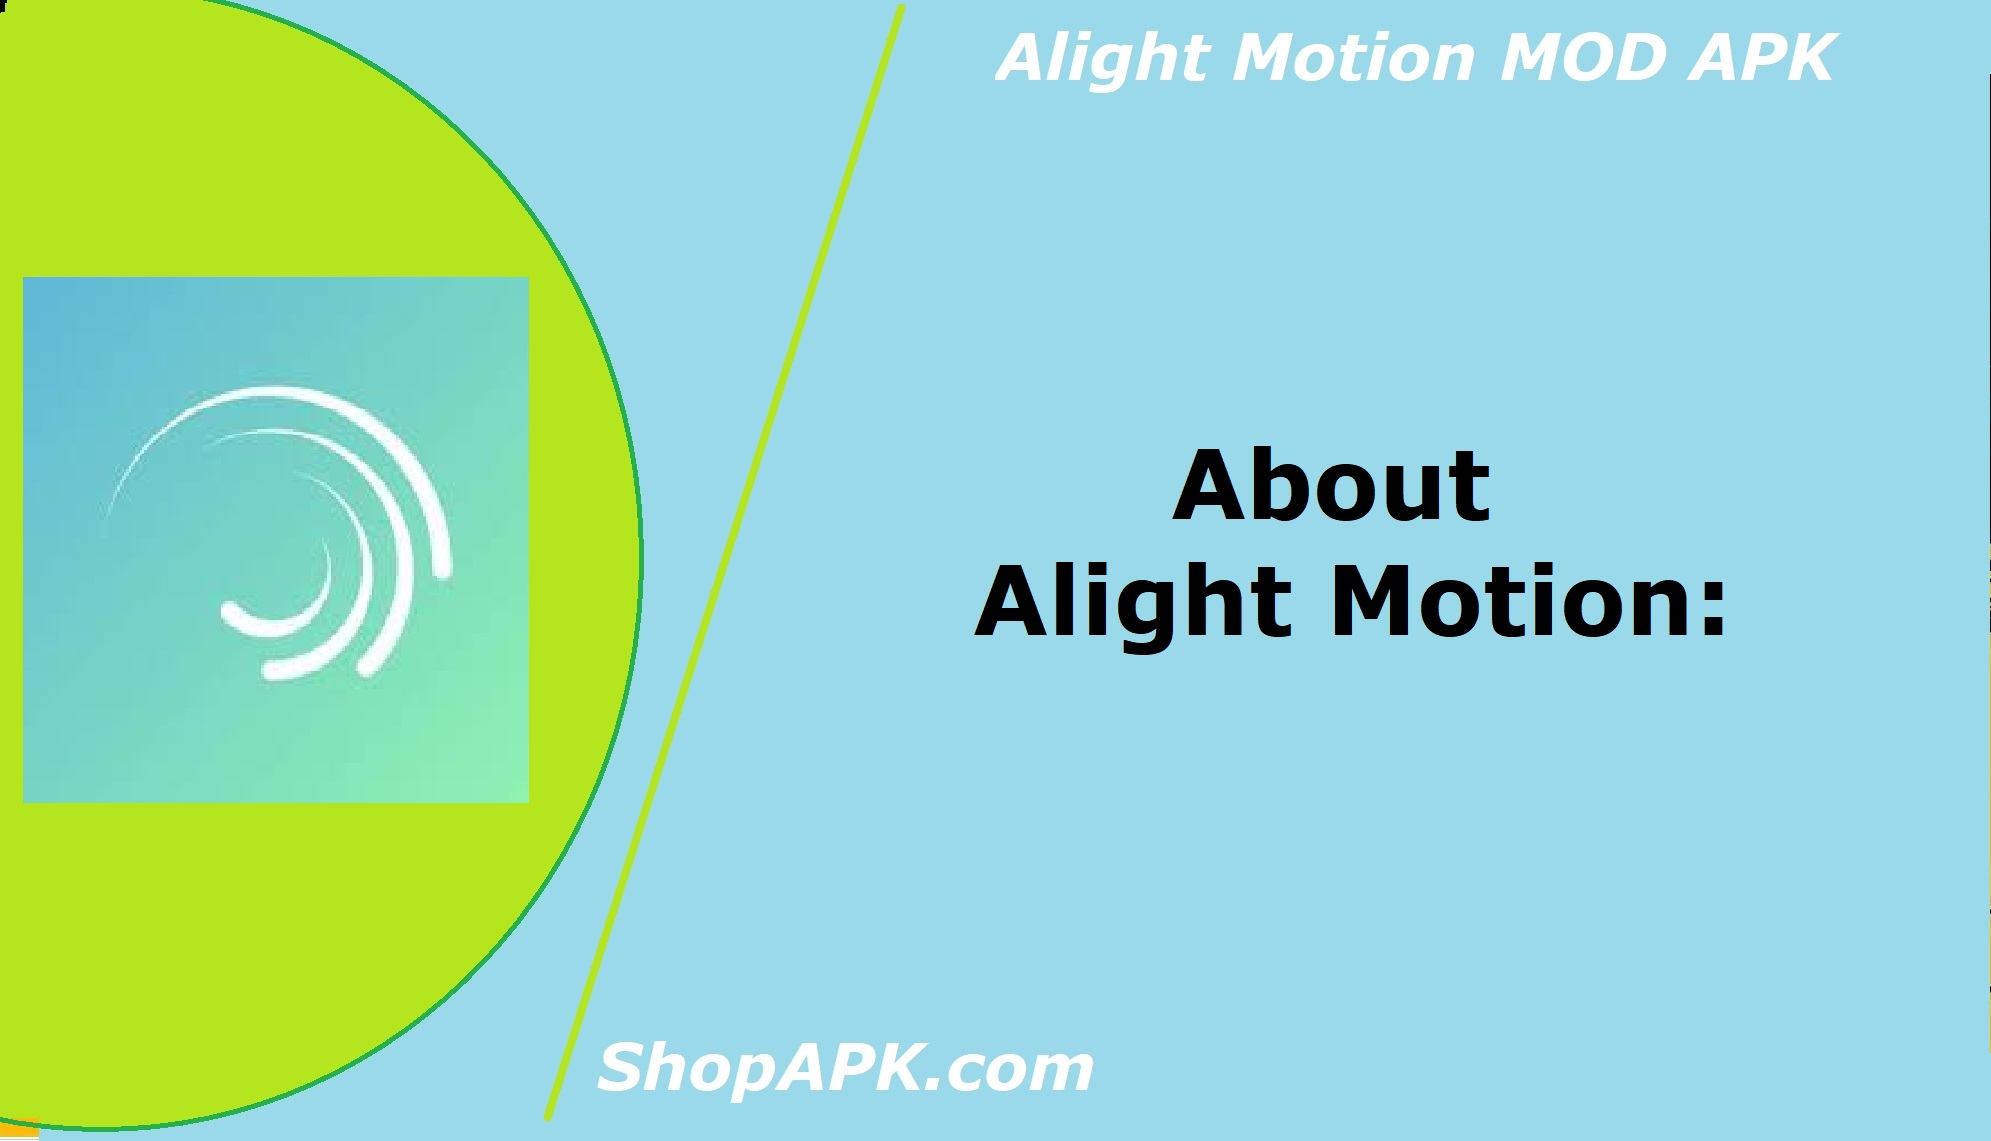 About Alight Motion